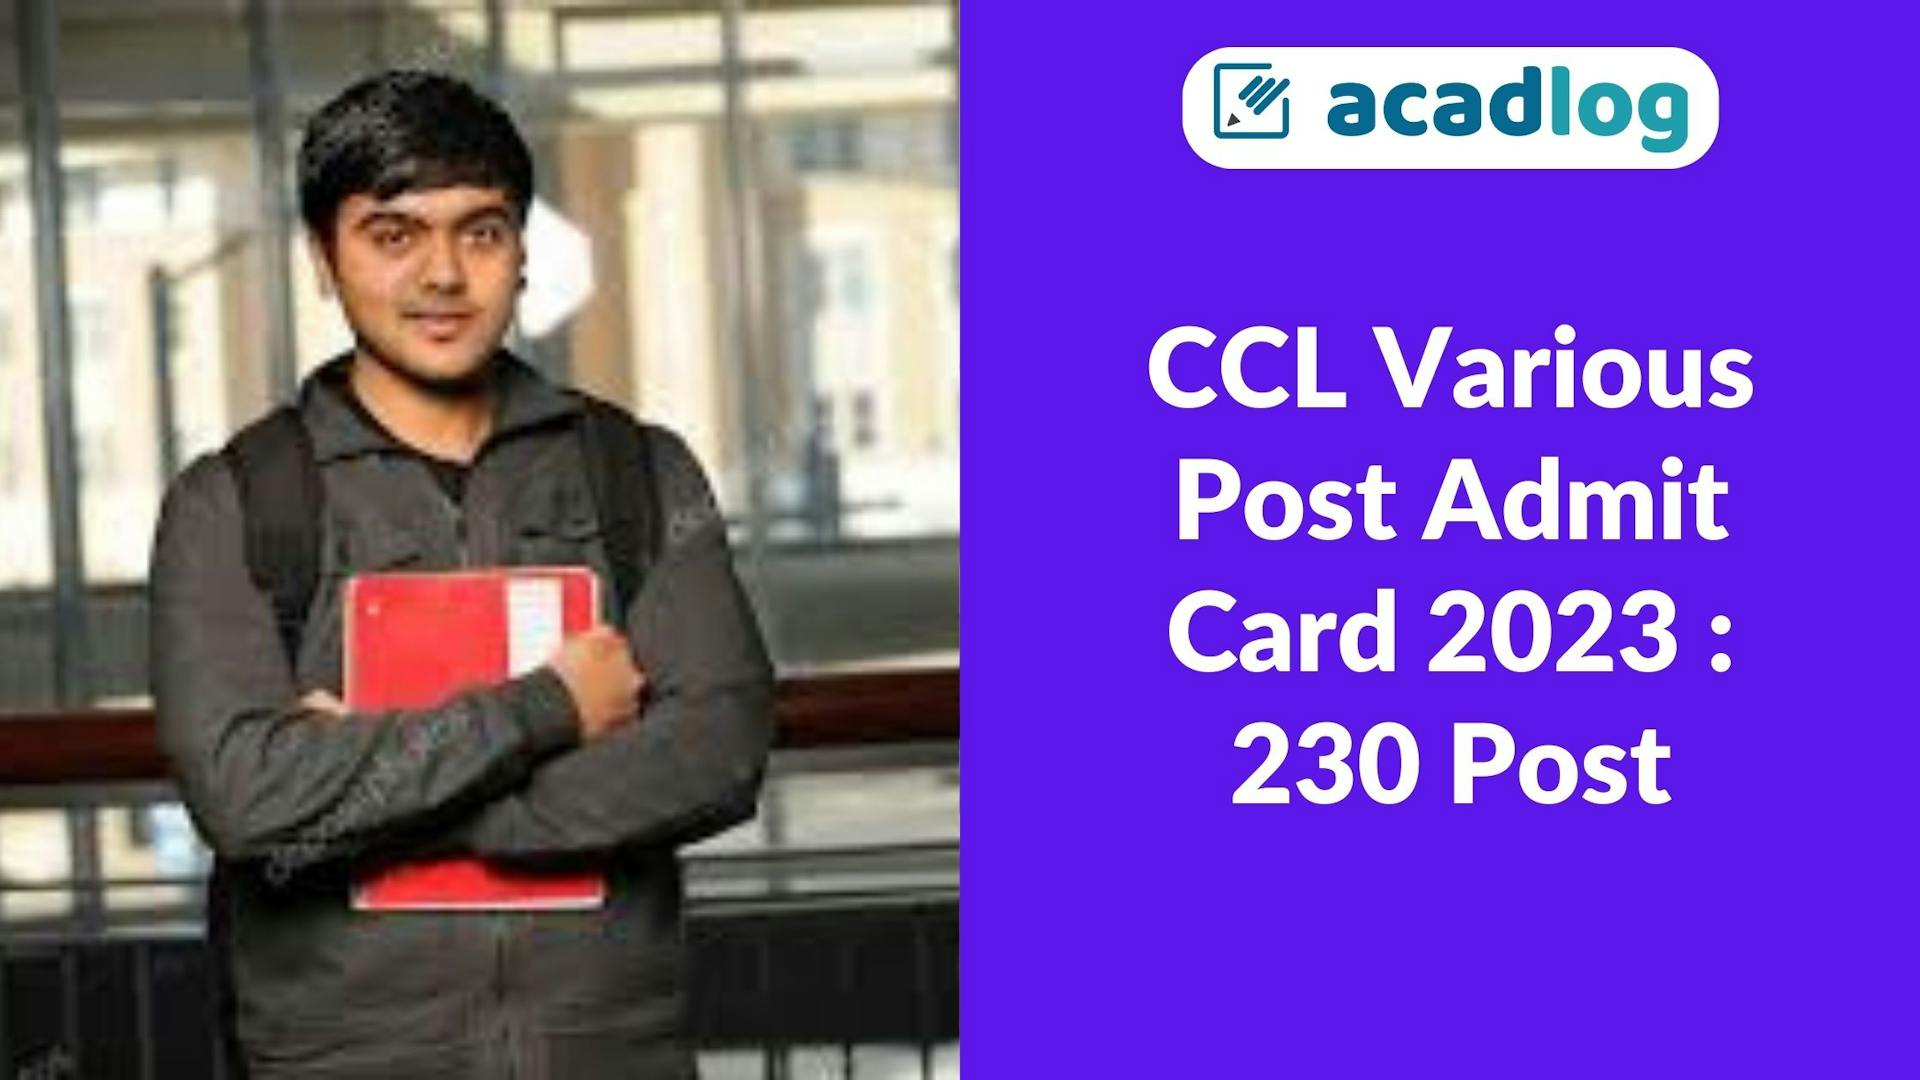 Acadlog: CCL Mining Sirdar, Electrician, Deputy Surveyor and Assistant Foreman Recruitment 2023 Admit Card for 230 Post